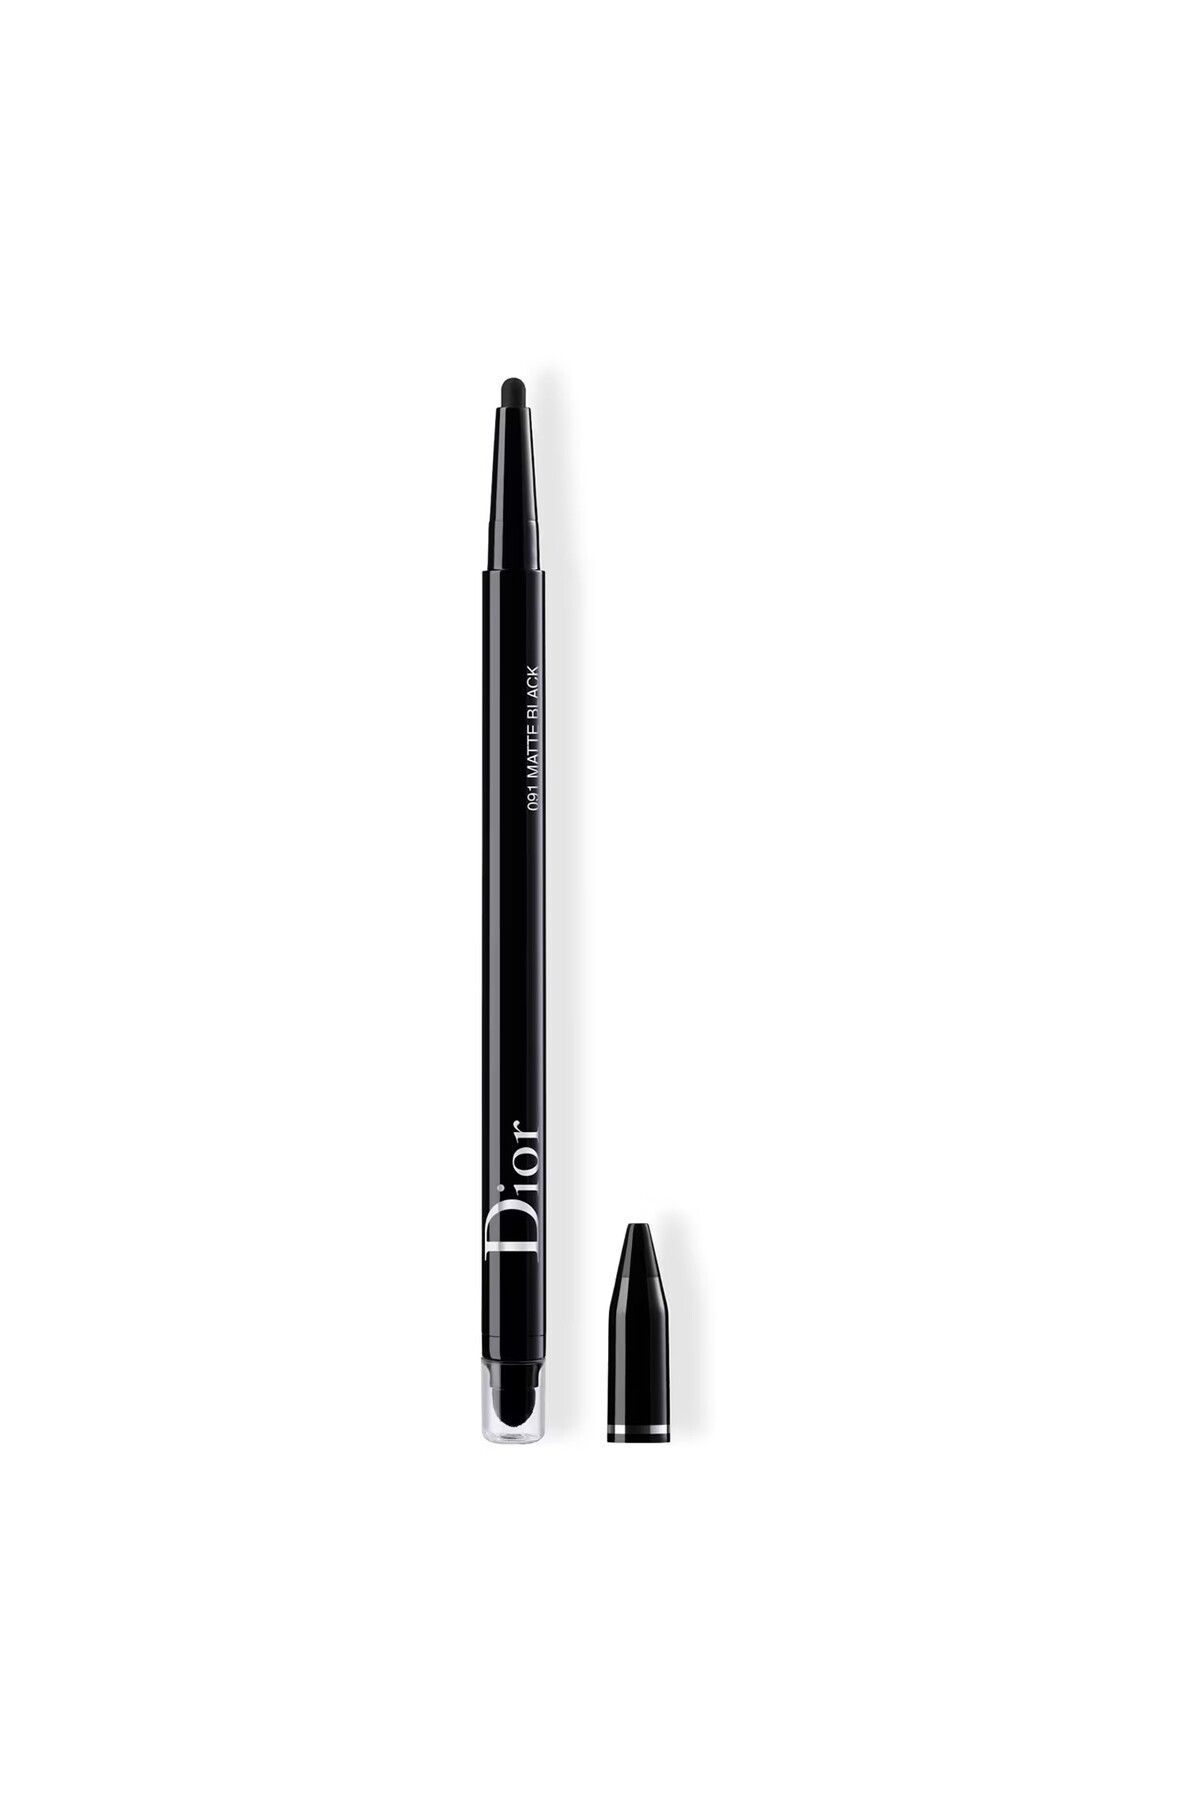 Dior 24H*STYLO WATERPROOF -WEAR-LASTİNG PROTECTİON FOR UP TO 24 HOURS, MATTE EYELİNER PSSN1967